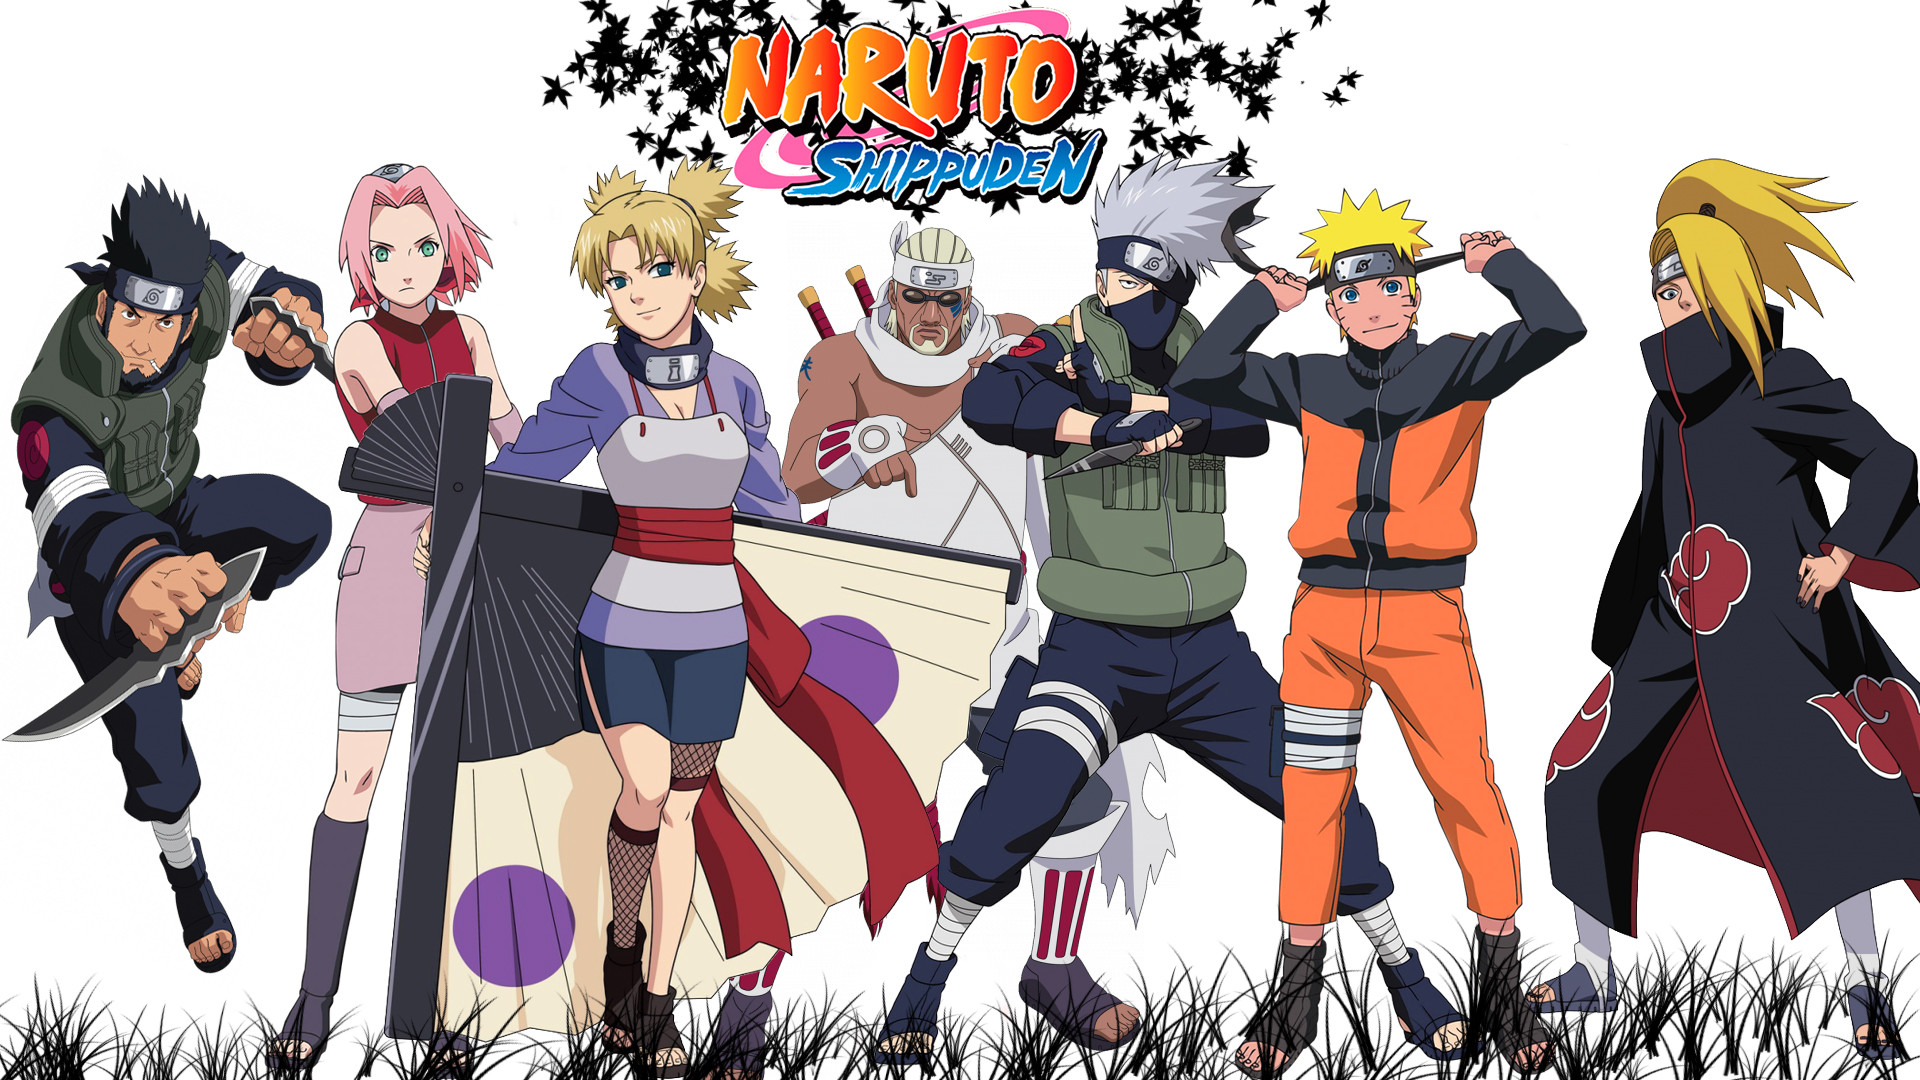 Free Download Naruto Shippuden Awesome Phone Wallpapers 